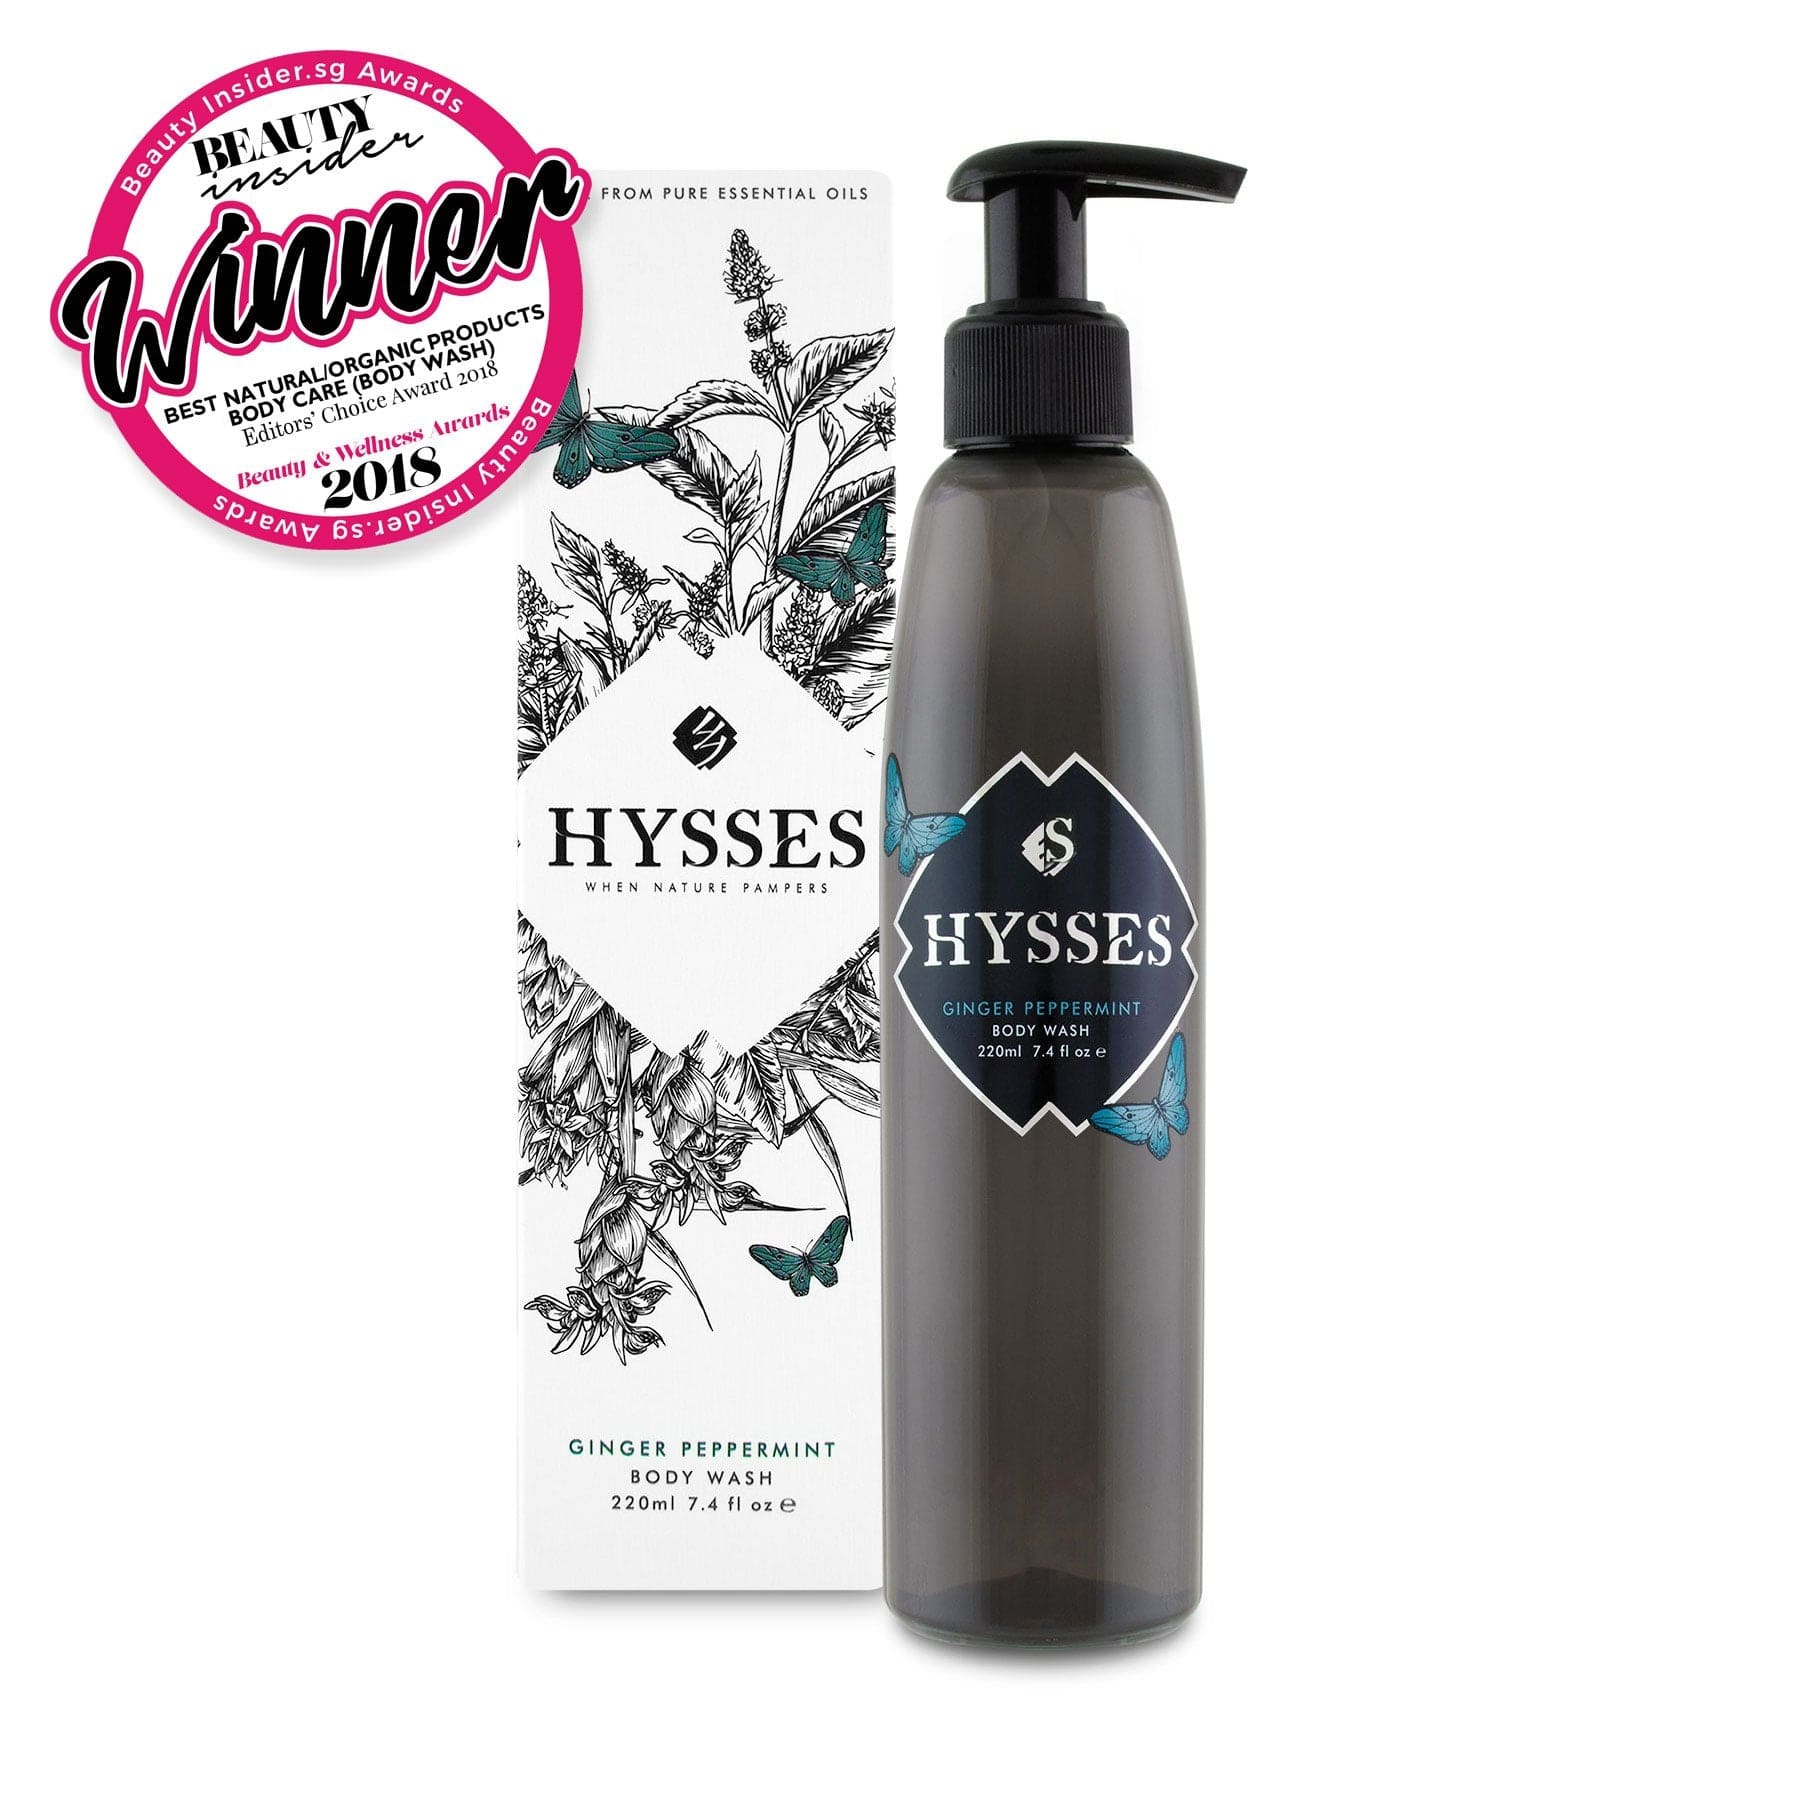 Hysses Body Care 220ml Body Wash Ginger Peppermint